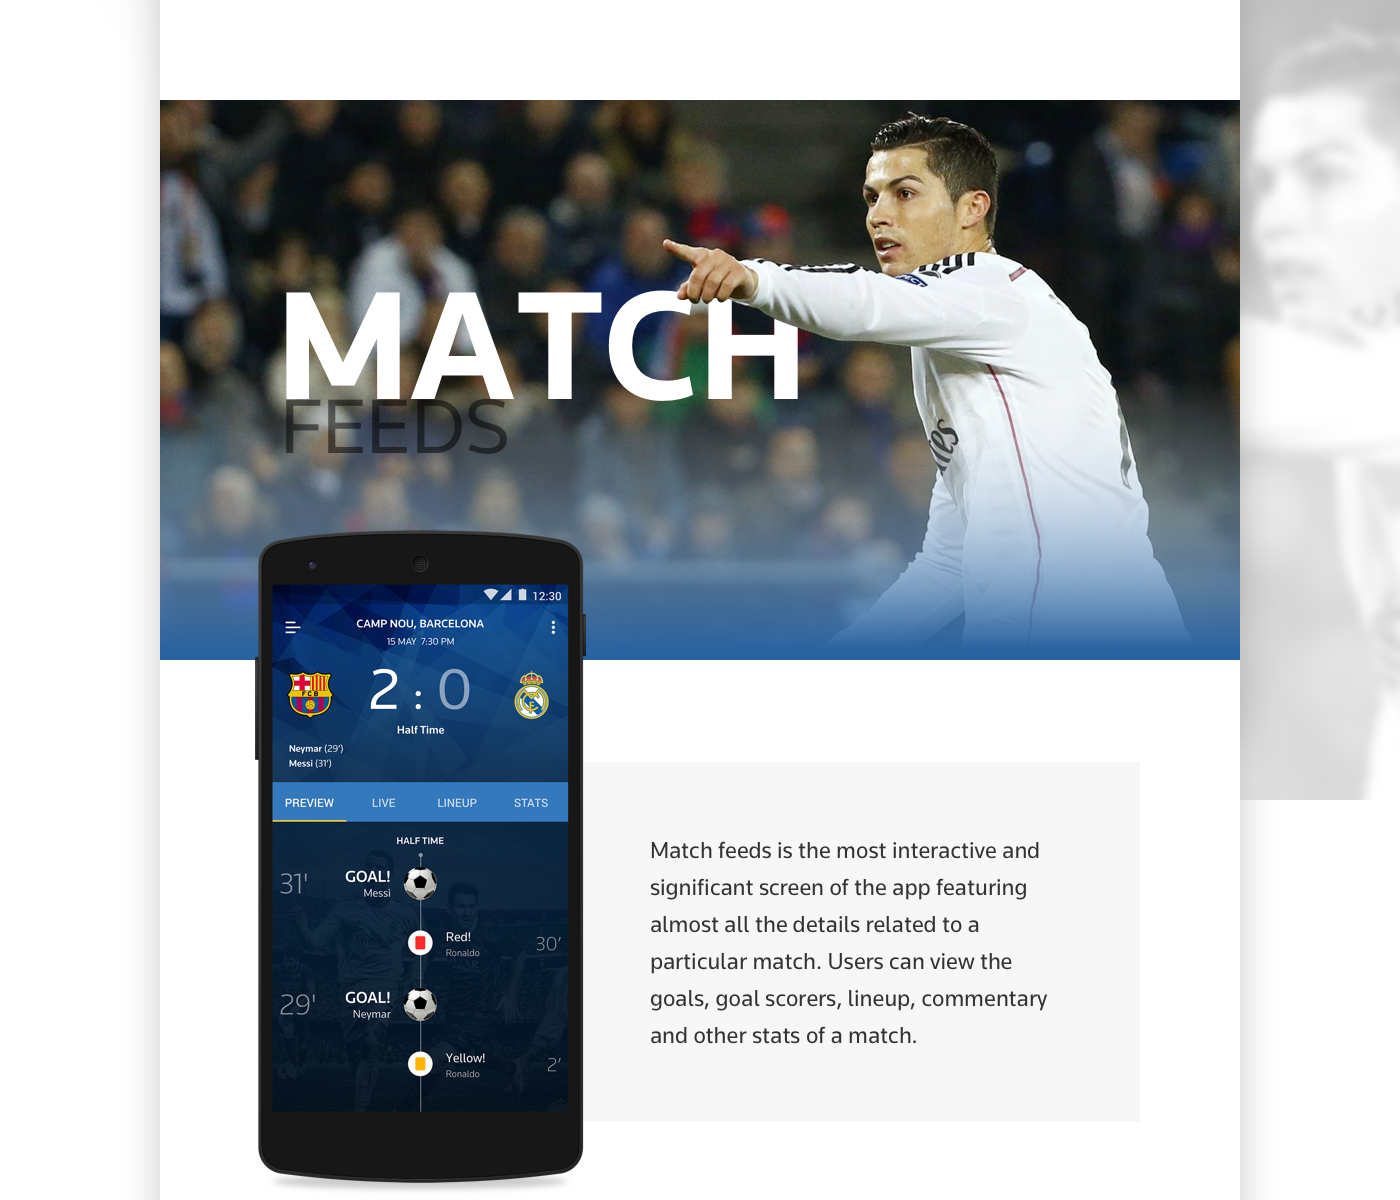 FIFA material design ui design score live live match match feed online shopping mobile android